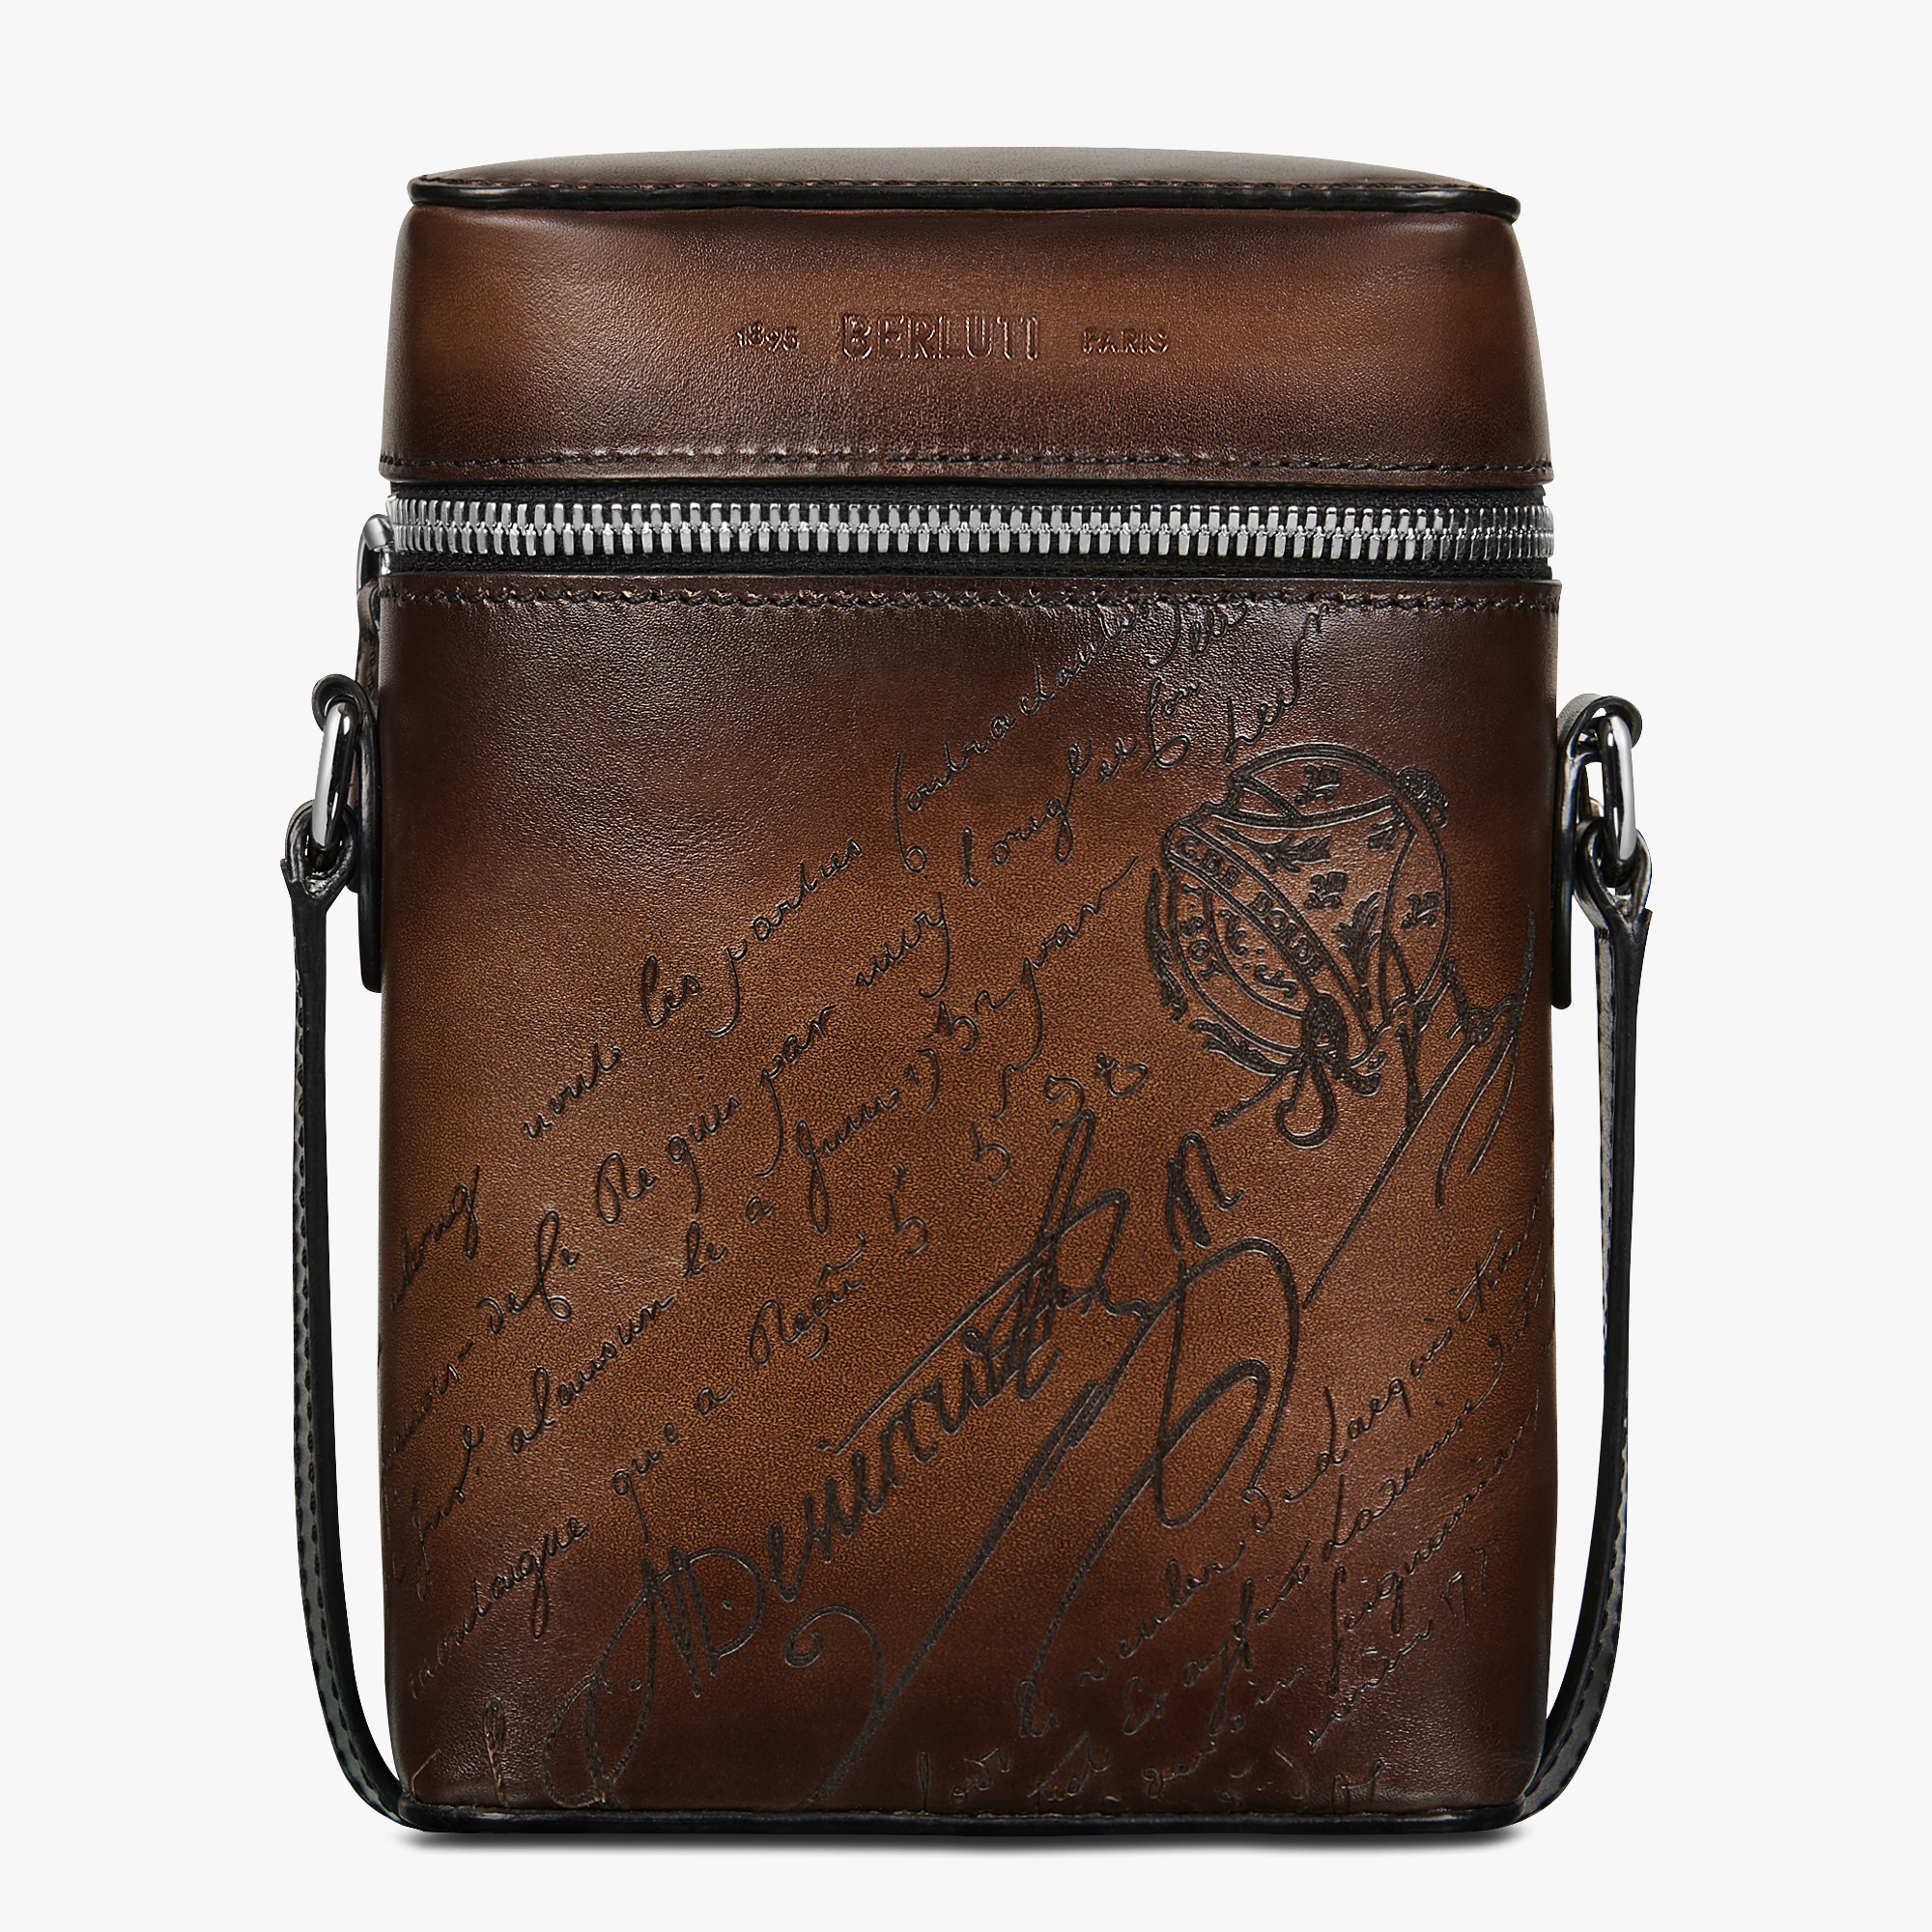 Free Scritto Swipe Leather Messenger, TDM INTENSO, hi-res